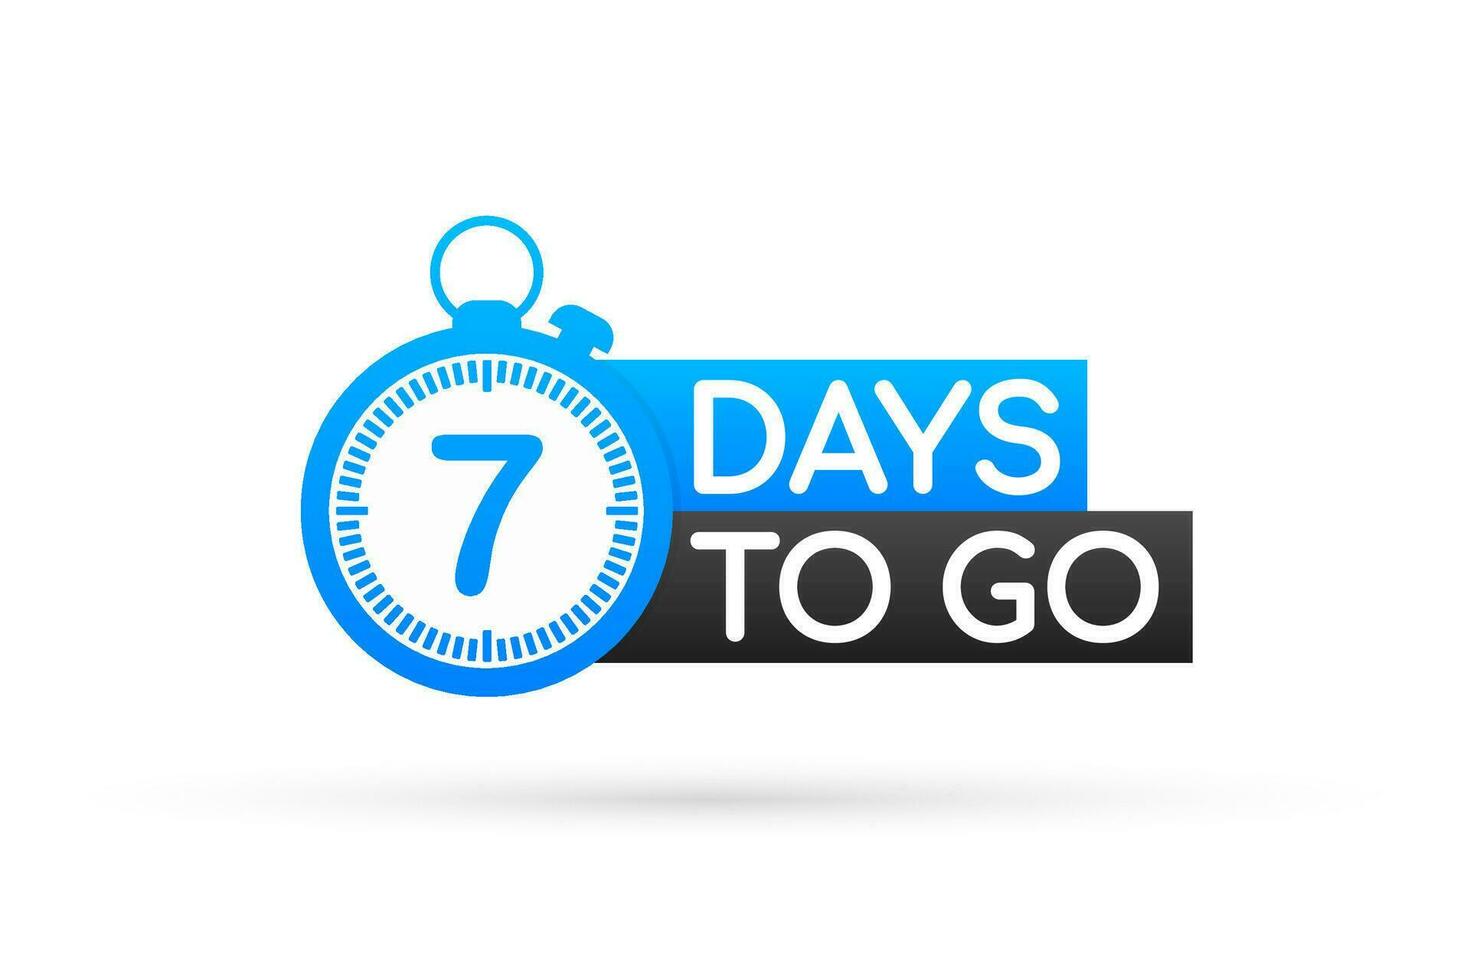 Seven days to go flat icon. Vector stock illustration